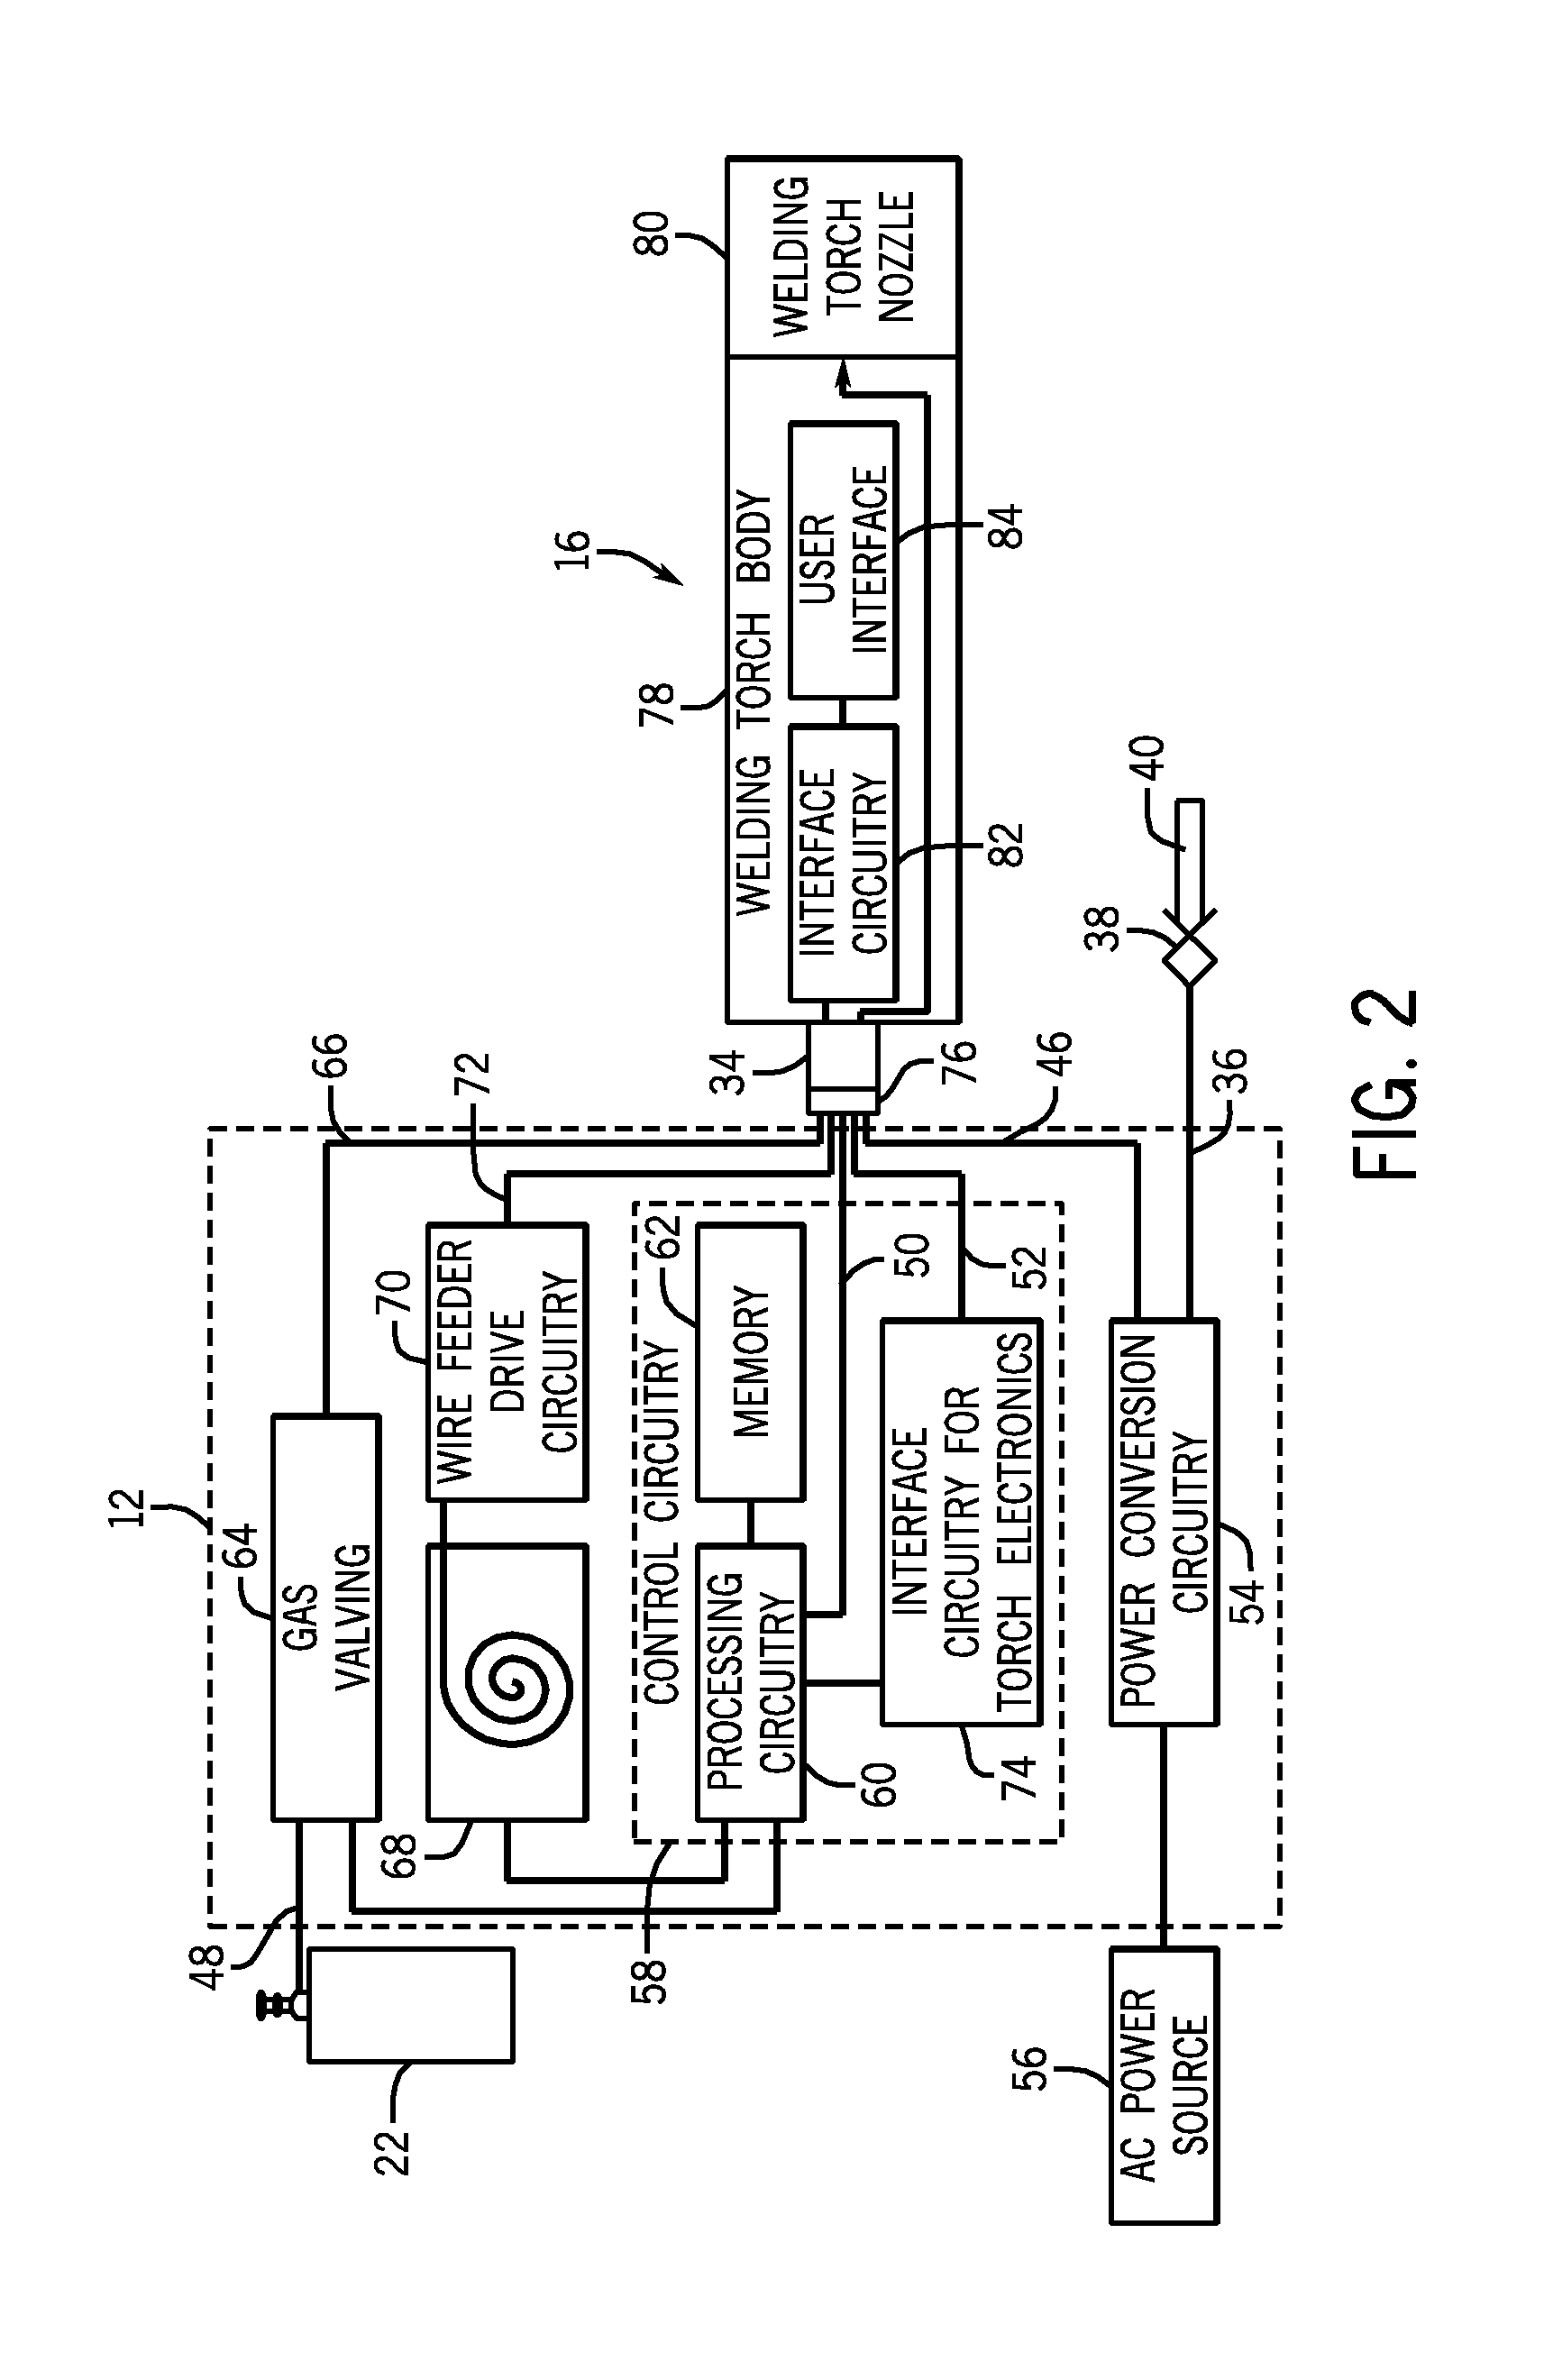 Welding device with integral user interface